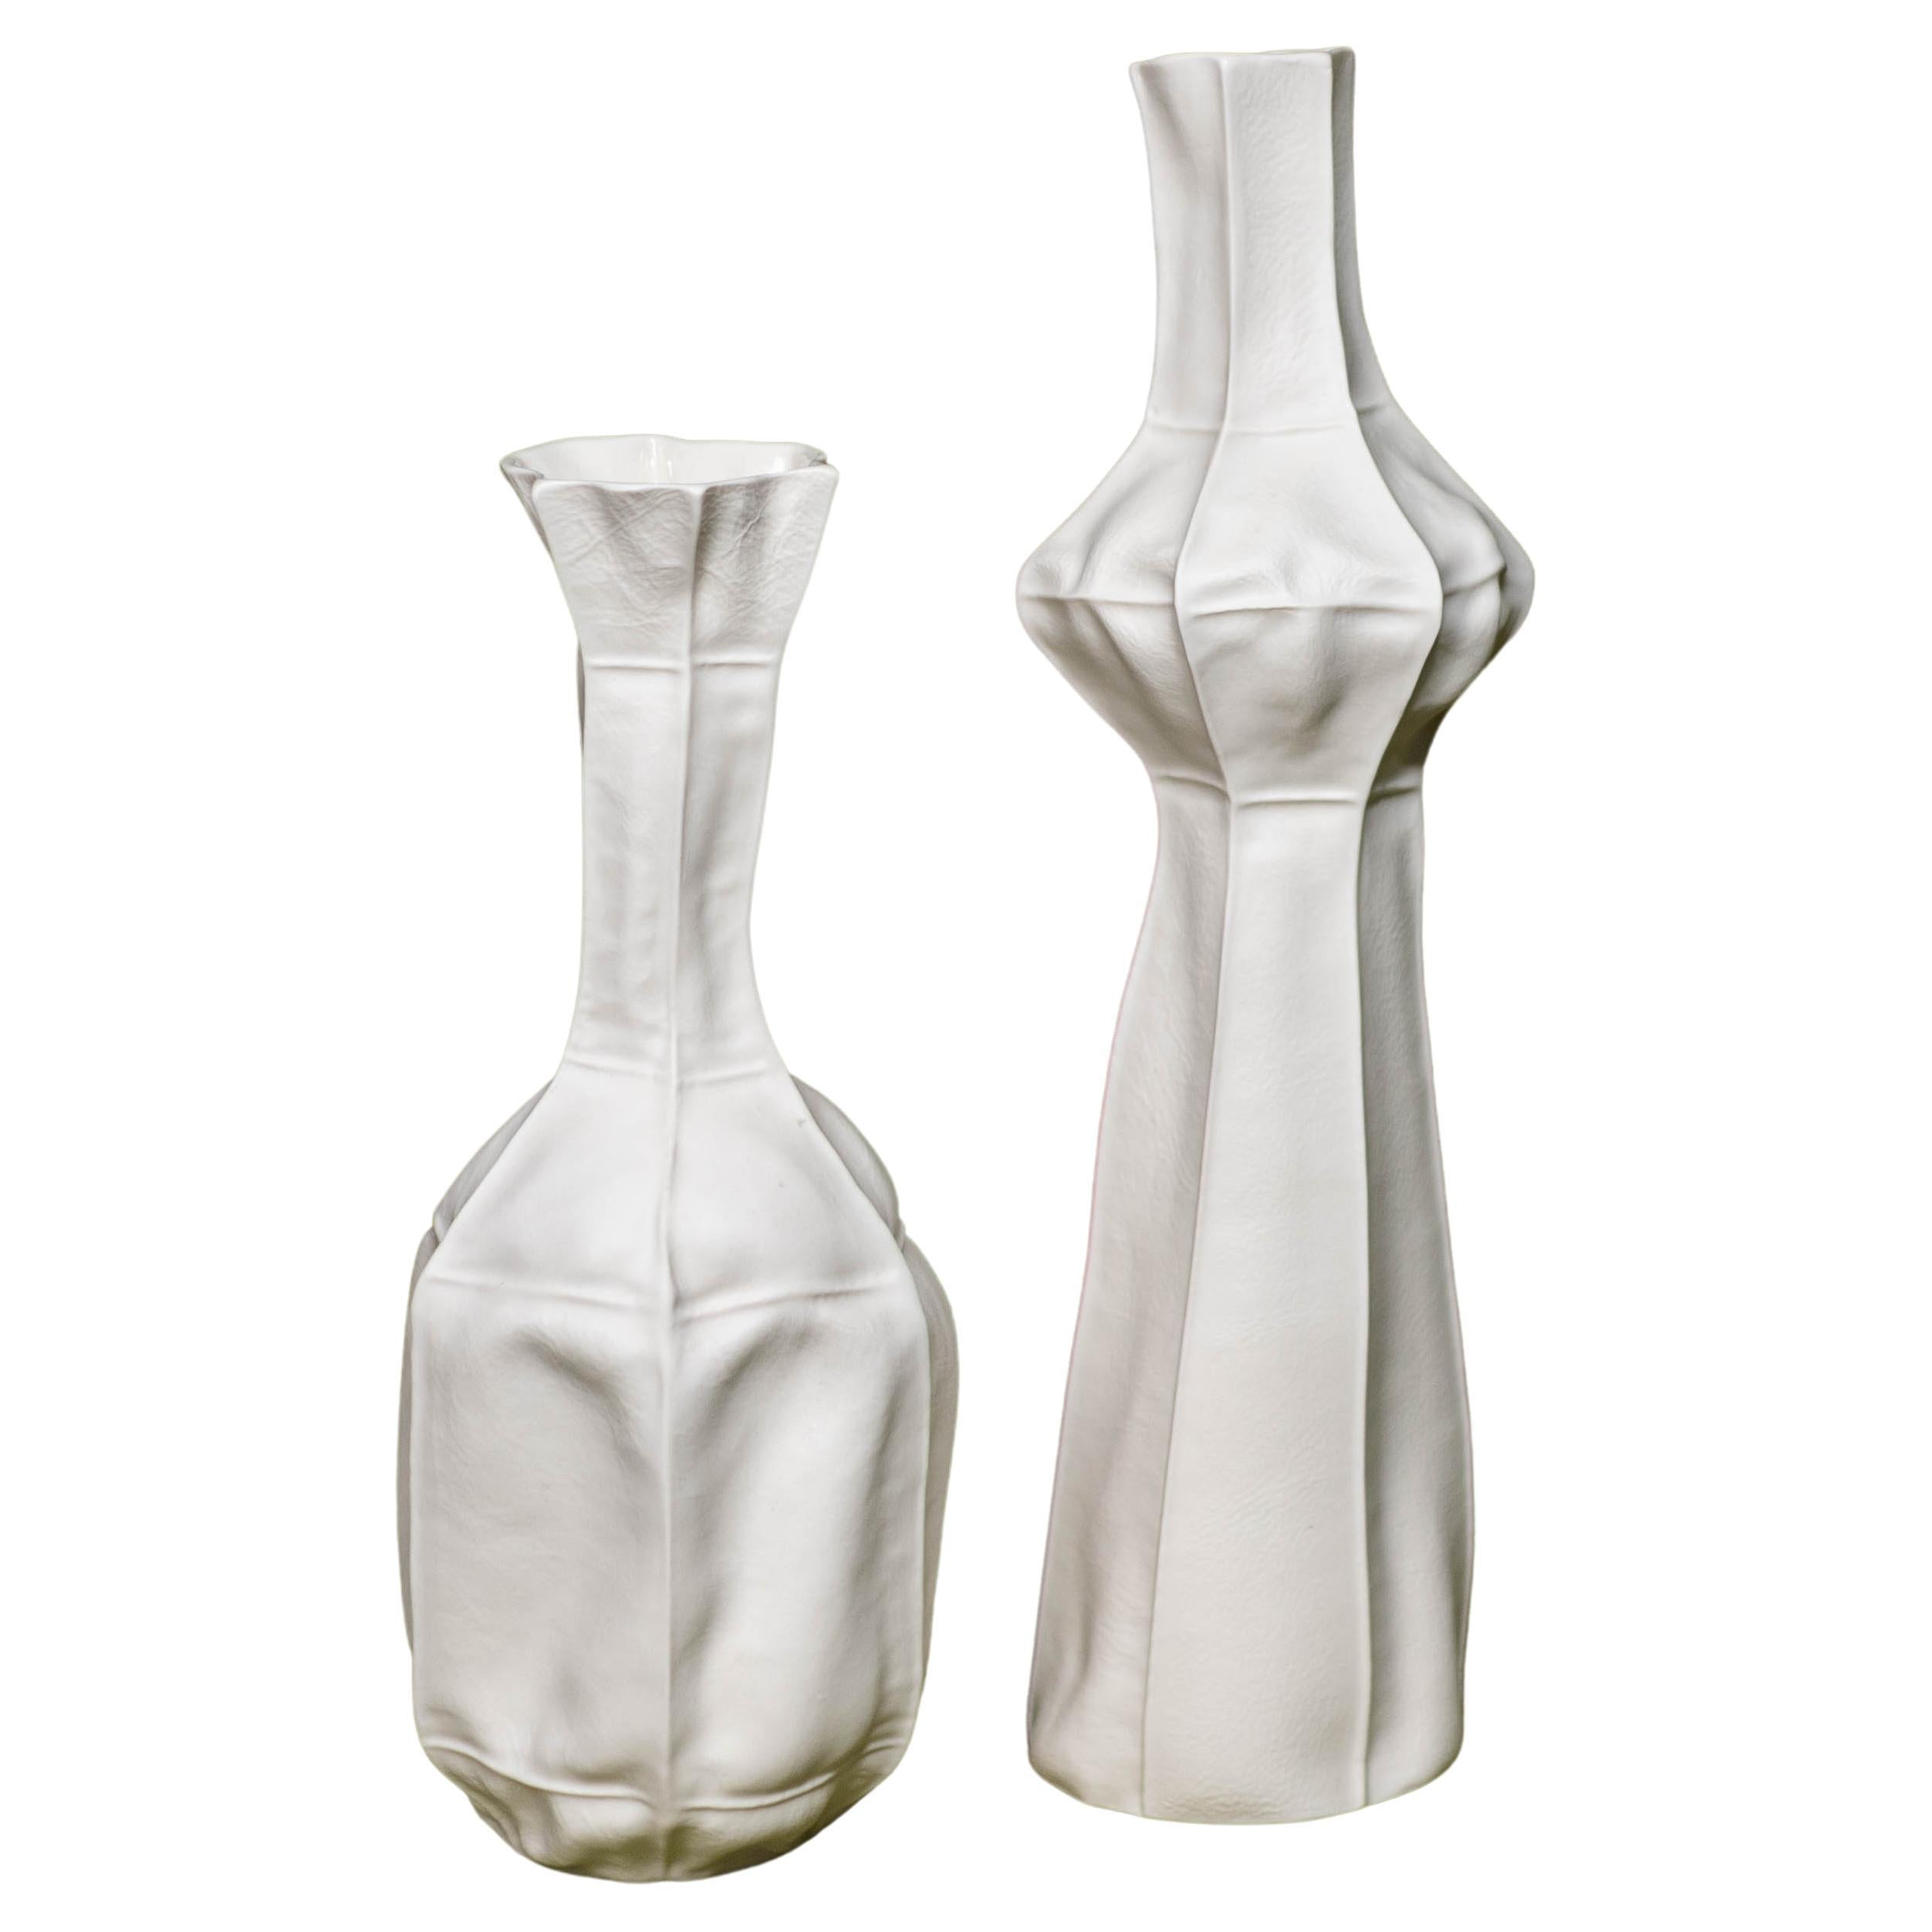 Pair of Sculptural White Ceramic Kawa Vases, by Luft Tanaka, organic, porcelain For Sale